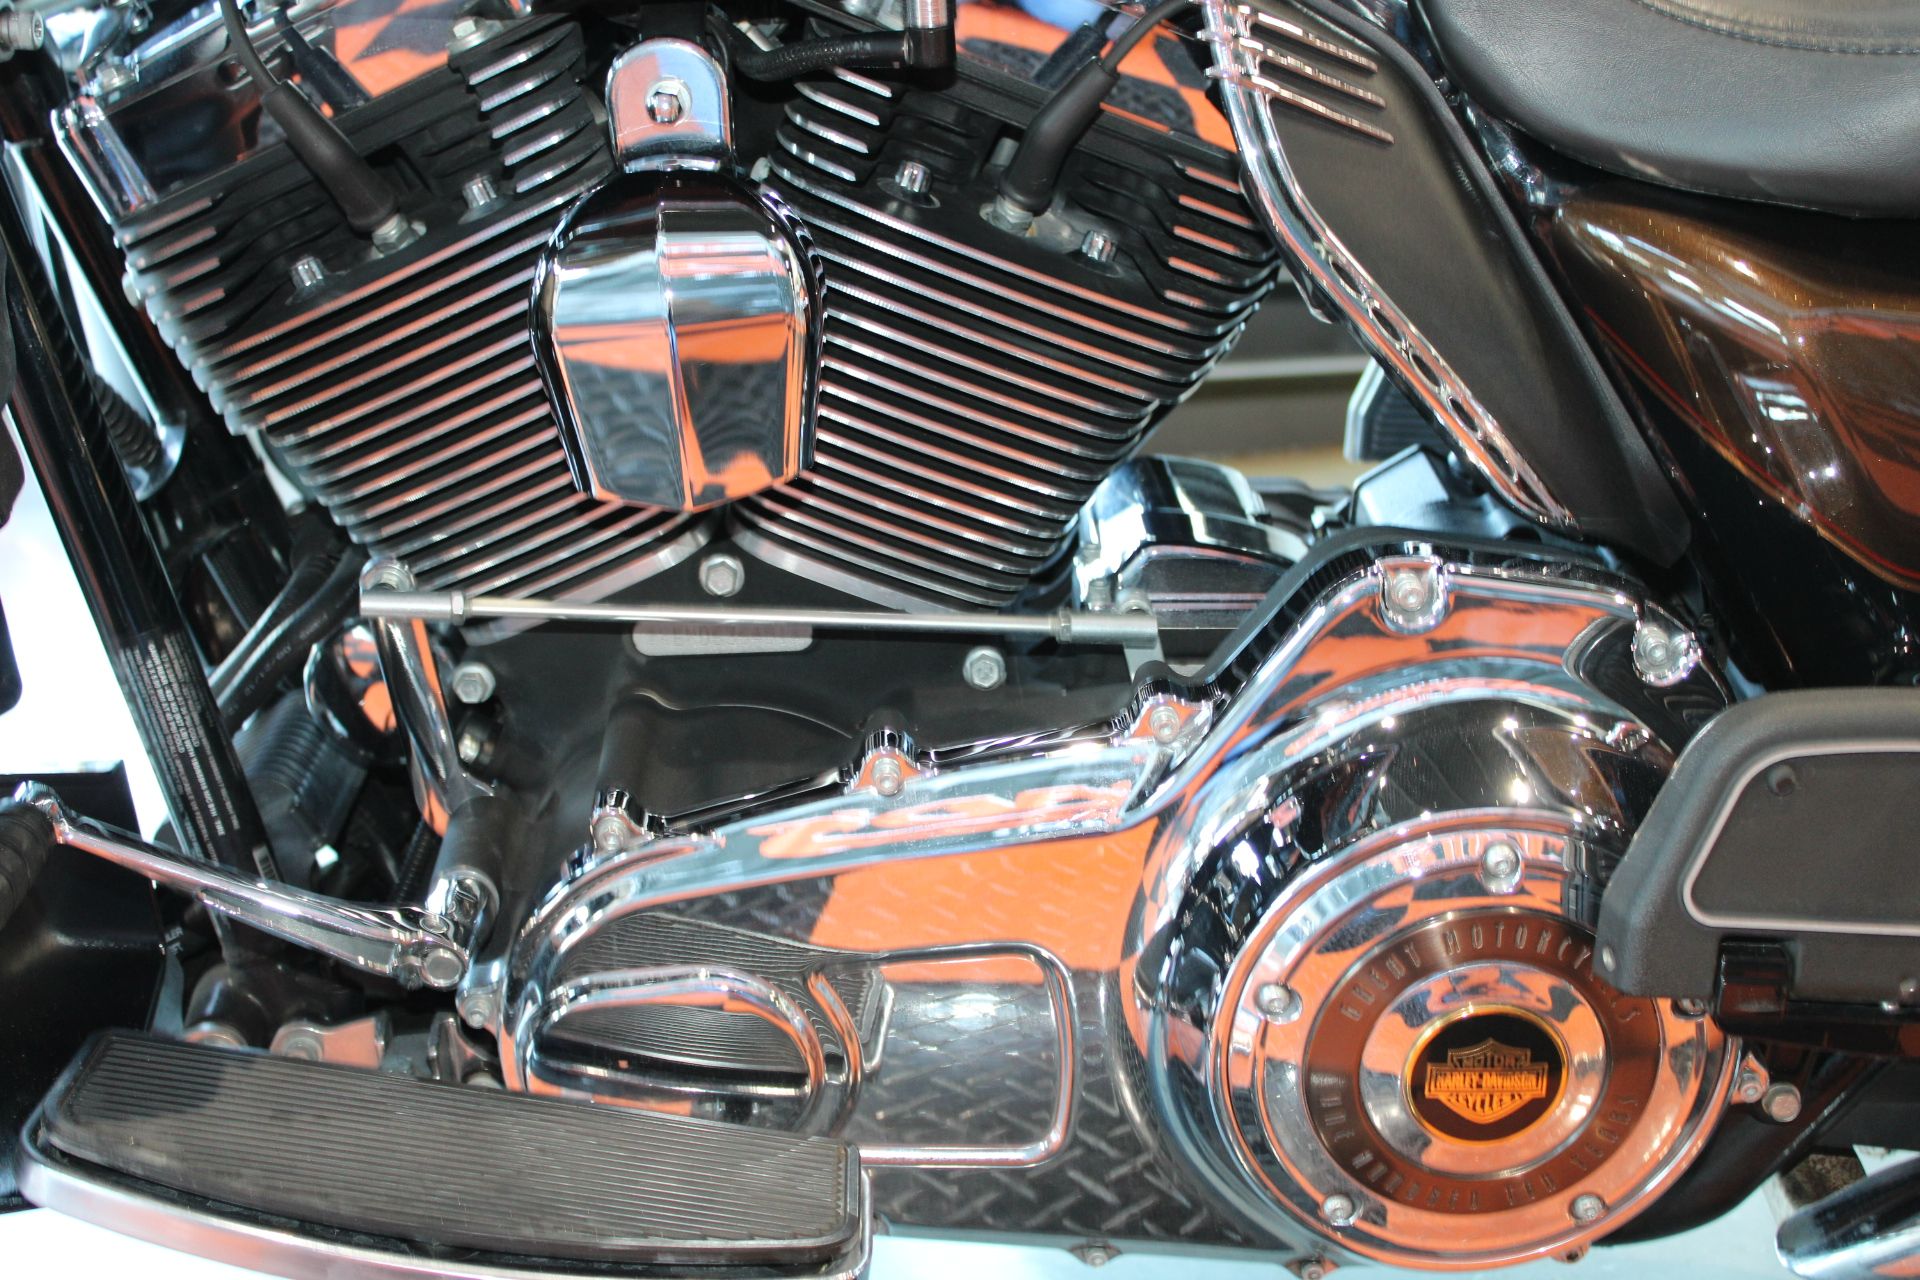 2013 Harley-Davidson Electra Glide® Ultra Limited in Shorewood, Illinois - Photo 2